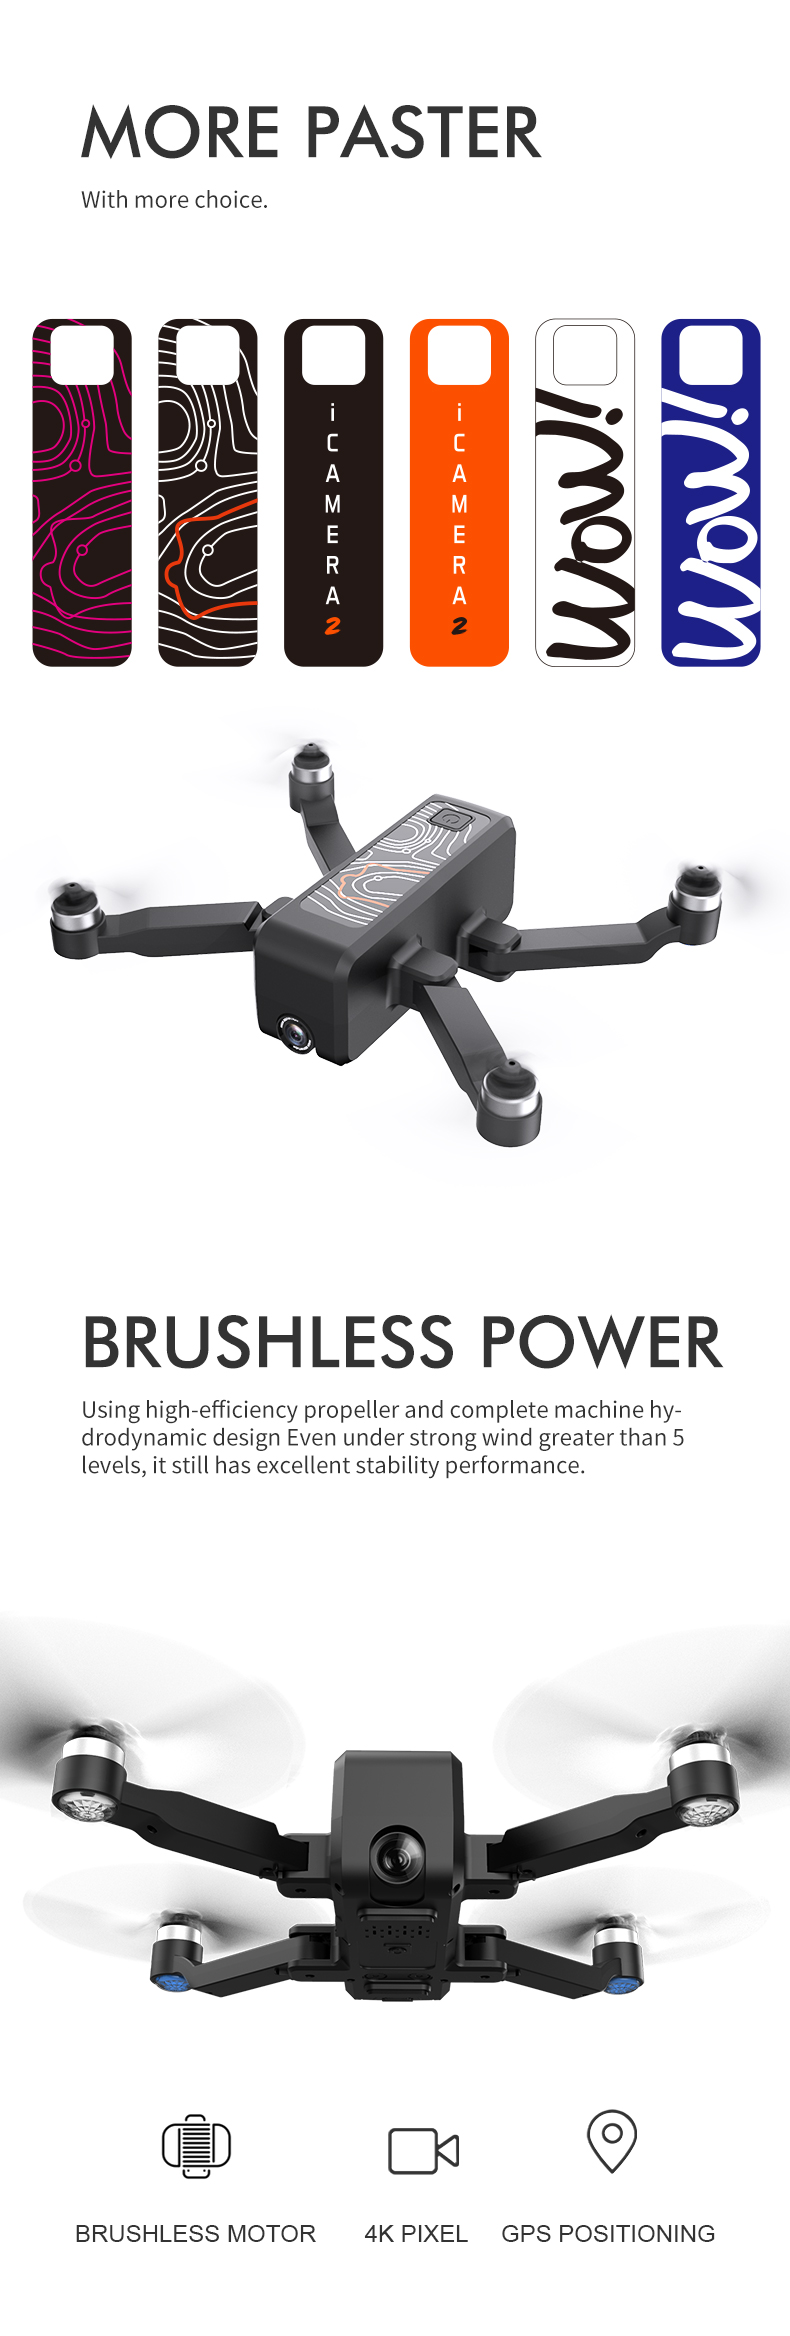 SHRC-iCAMERA-2-5G-WIFI-FPV-Aerial-Photography-Drone-with-4K-Pixel-Camera-GPSOptical-Flow-Dual-Positi-1733634-3